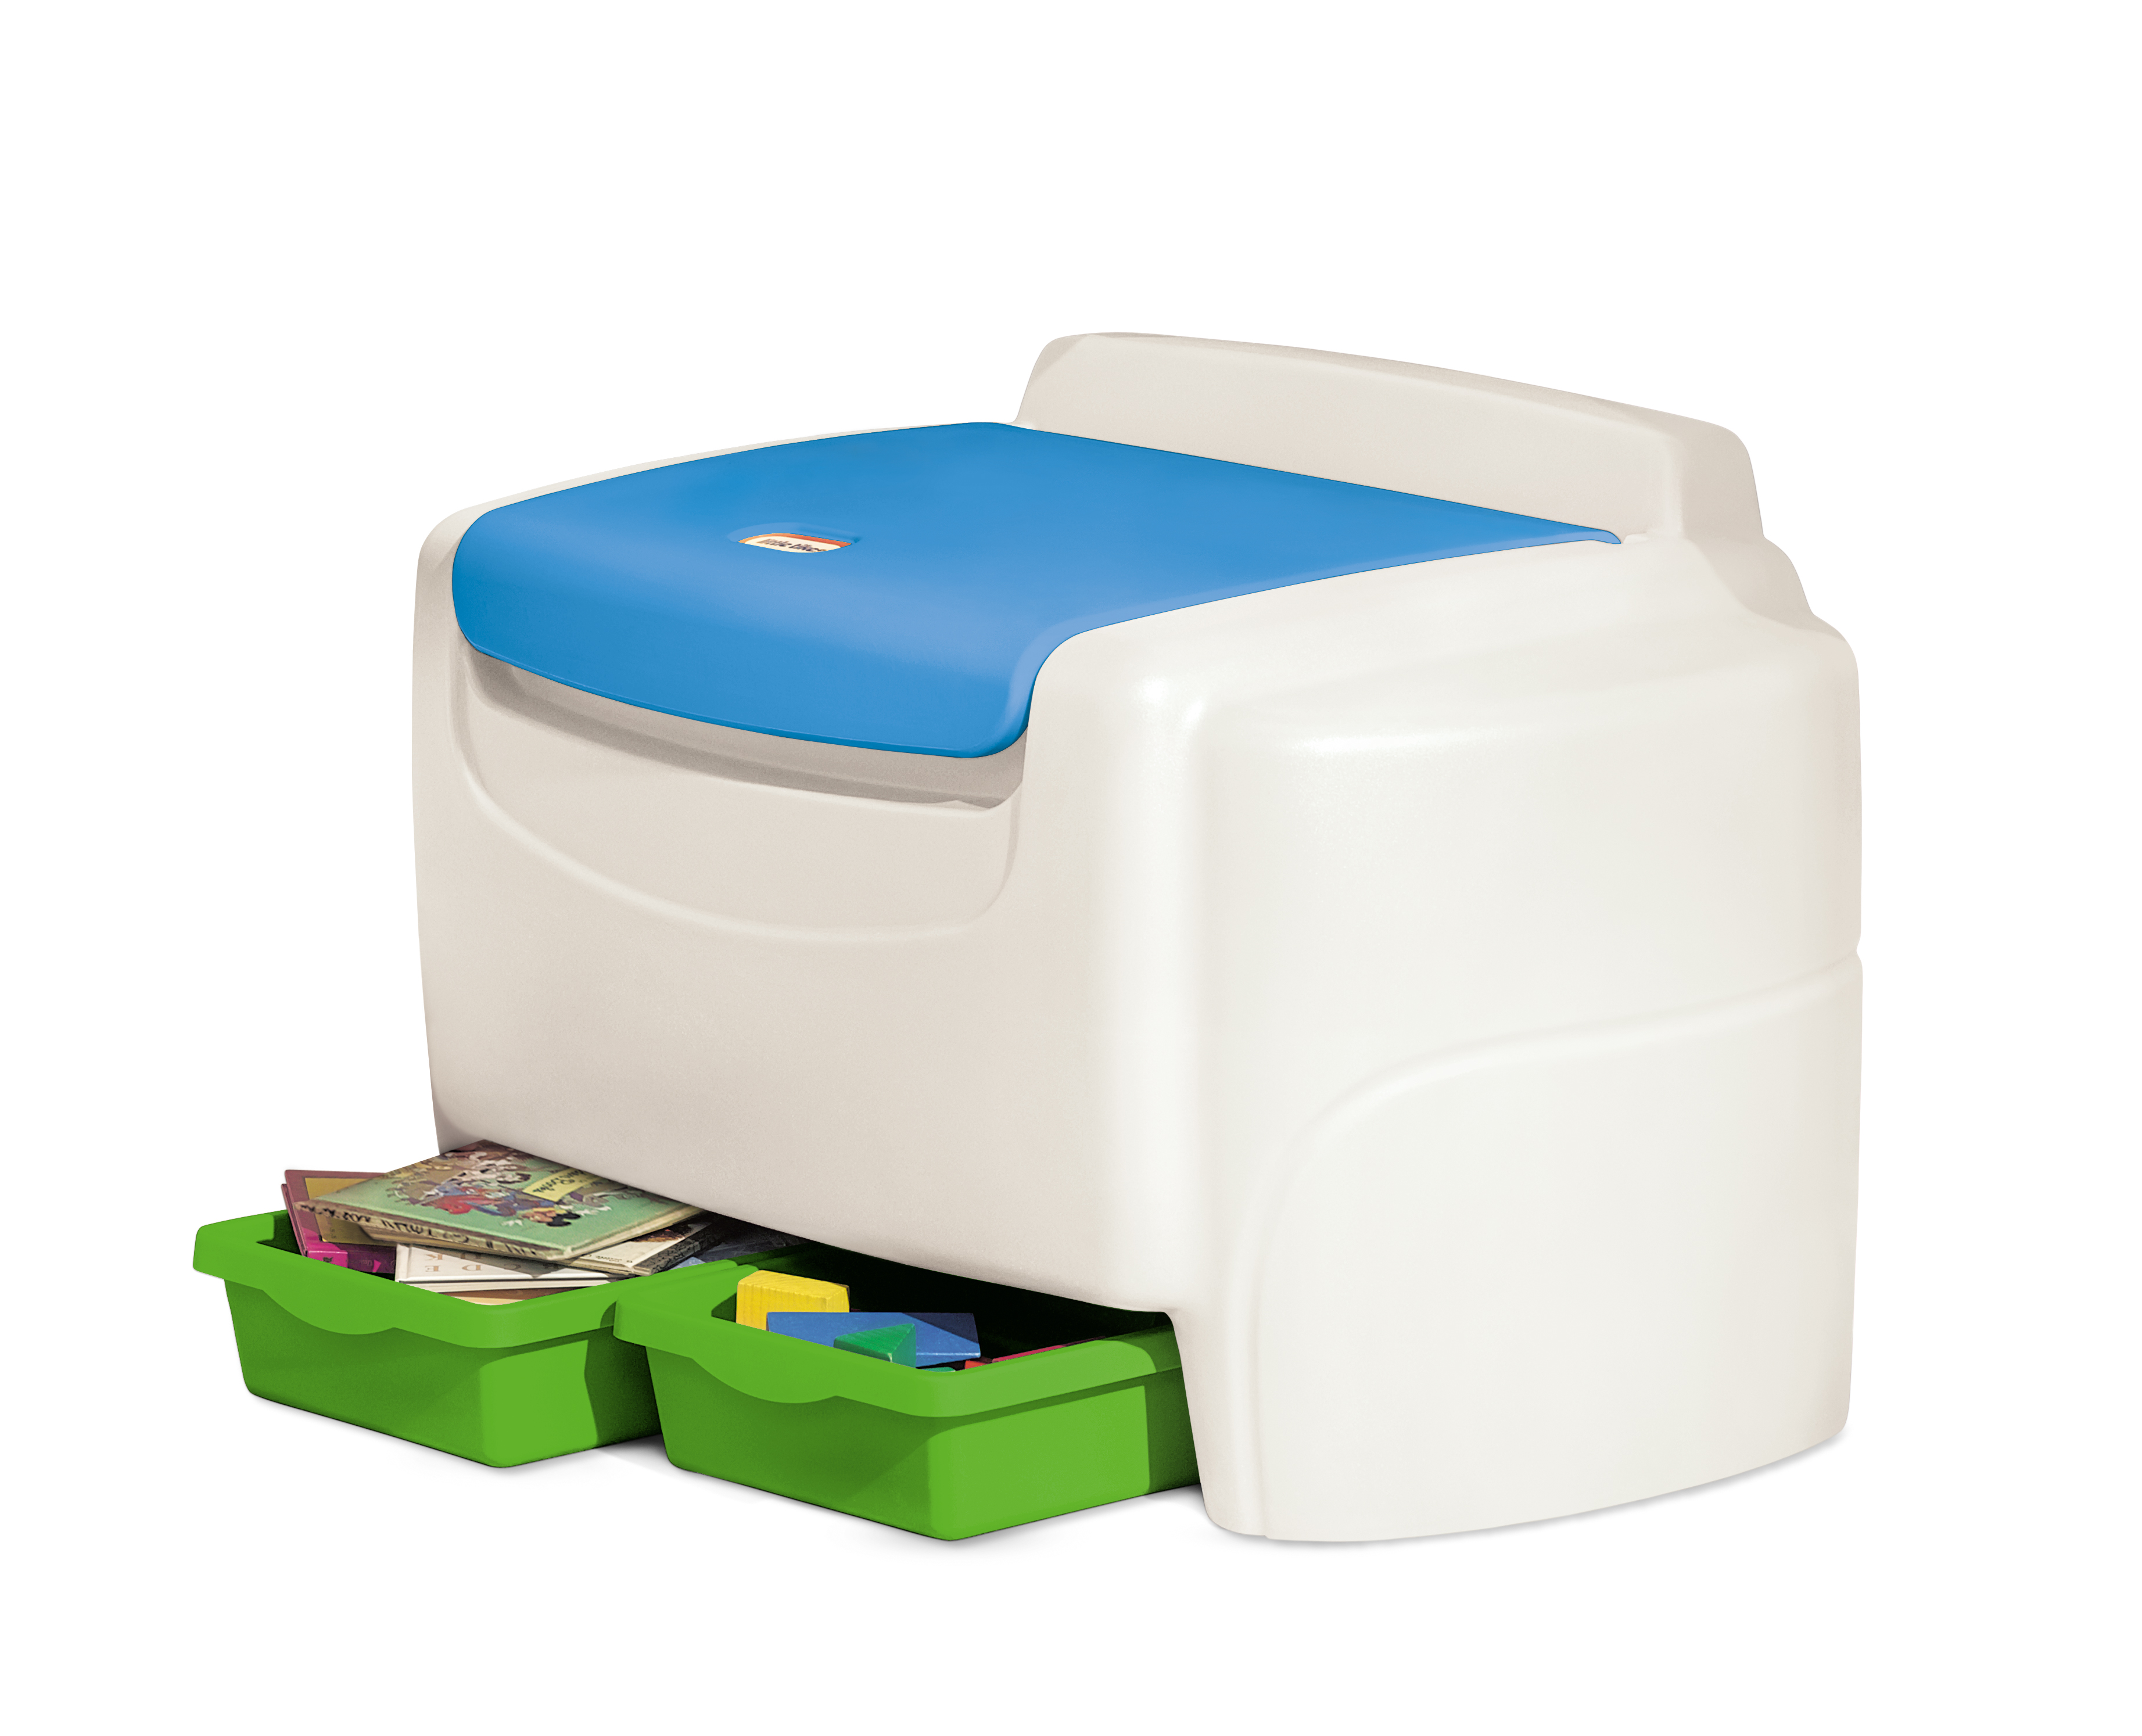 Little Tikes Sort 'n Store Toy Chest, White & Blue - Kids Toy Storage Chest - image 1 of 6